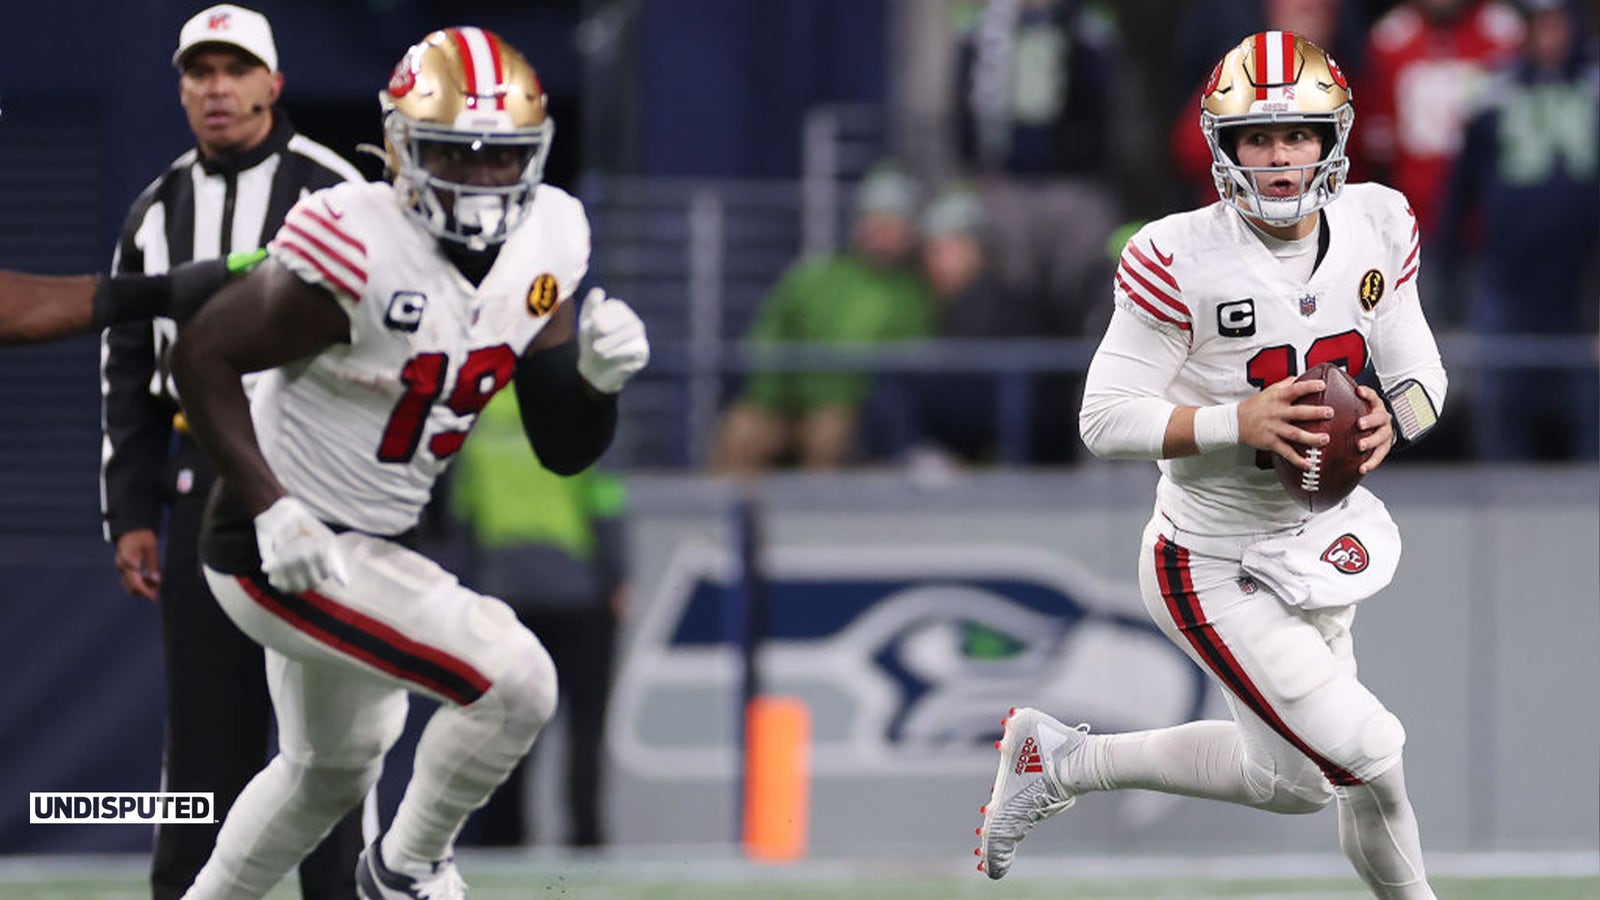 49ers force two turnovers, sack Geno Smith six times in 31-13 win vs. Seahawks | Undisputed